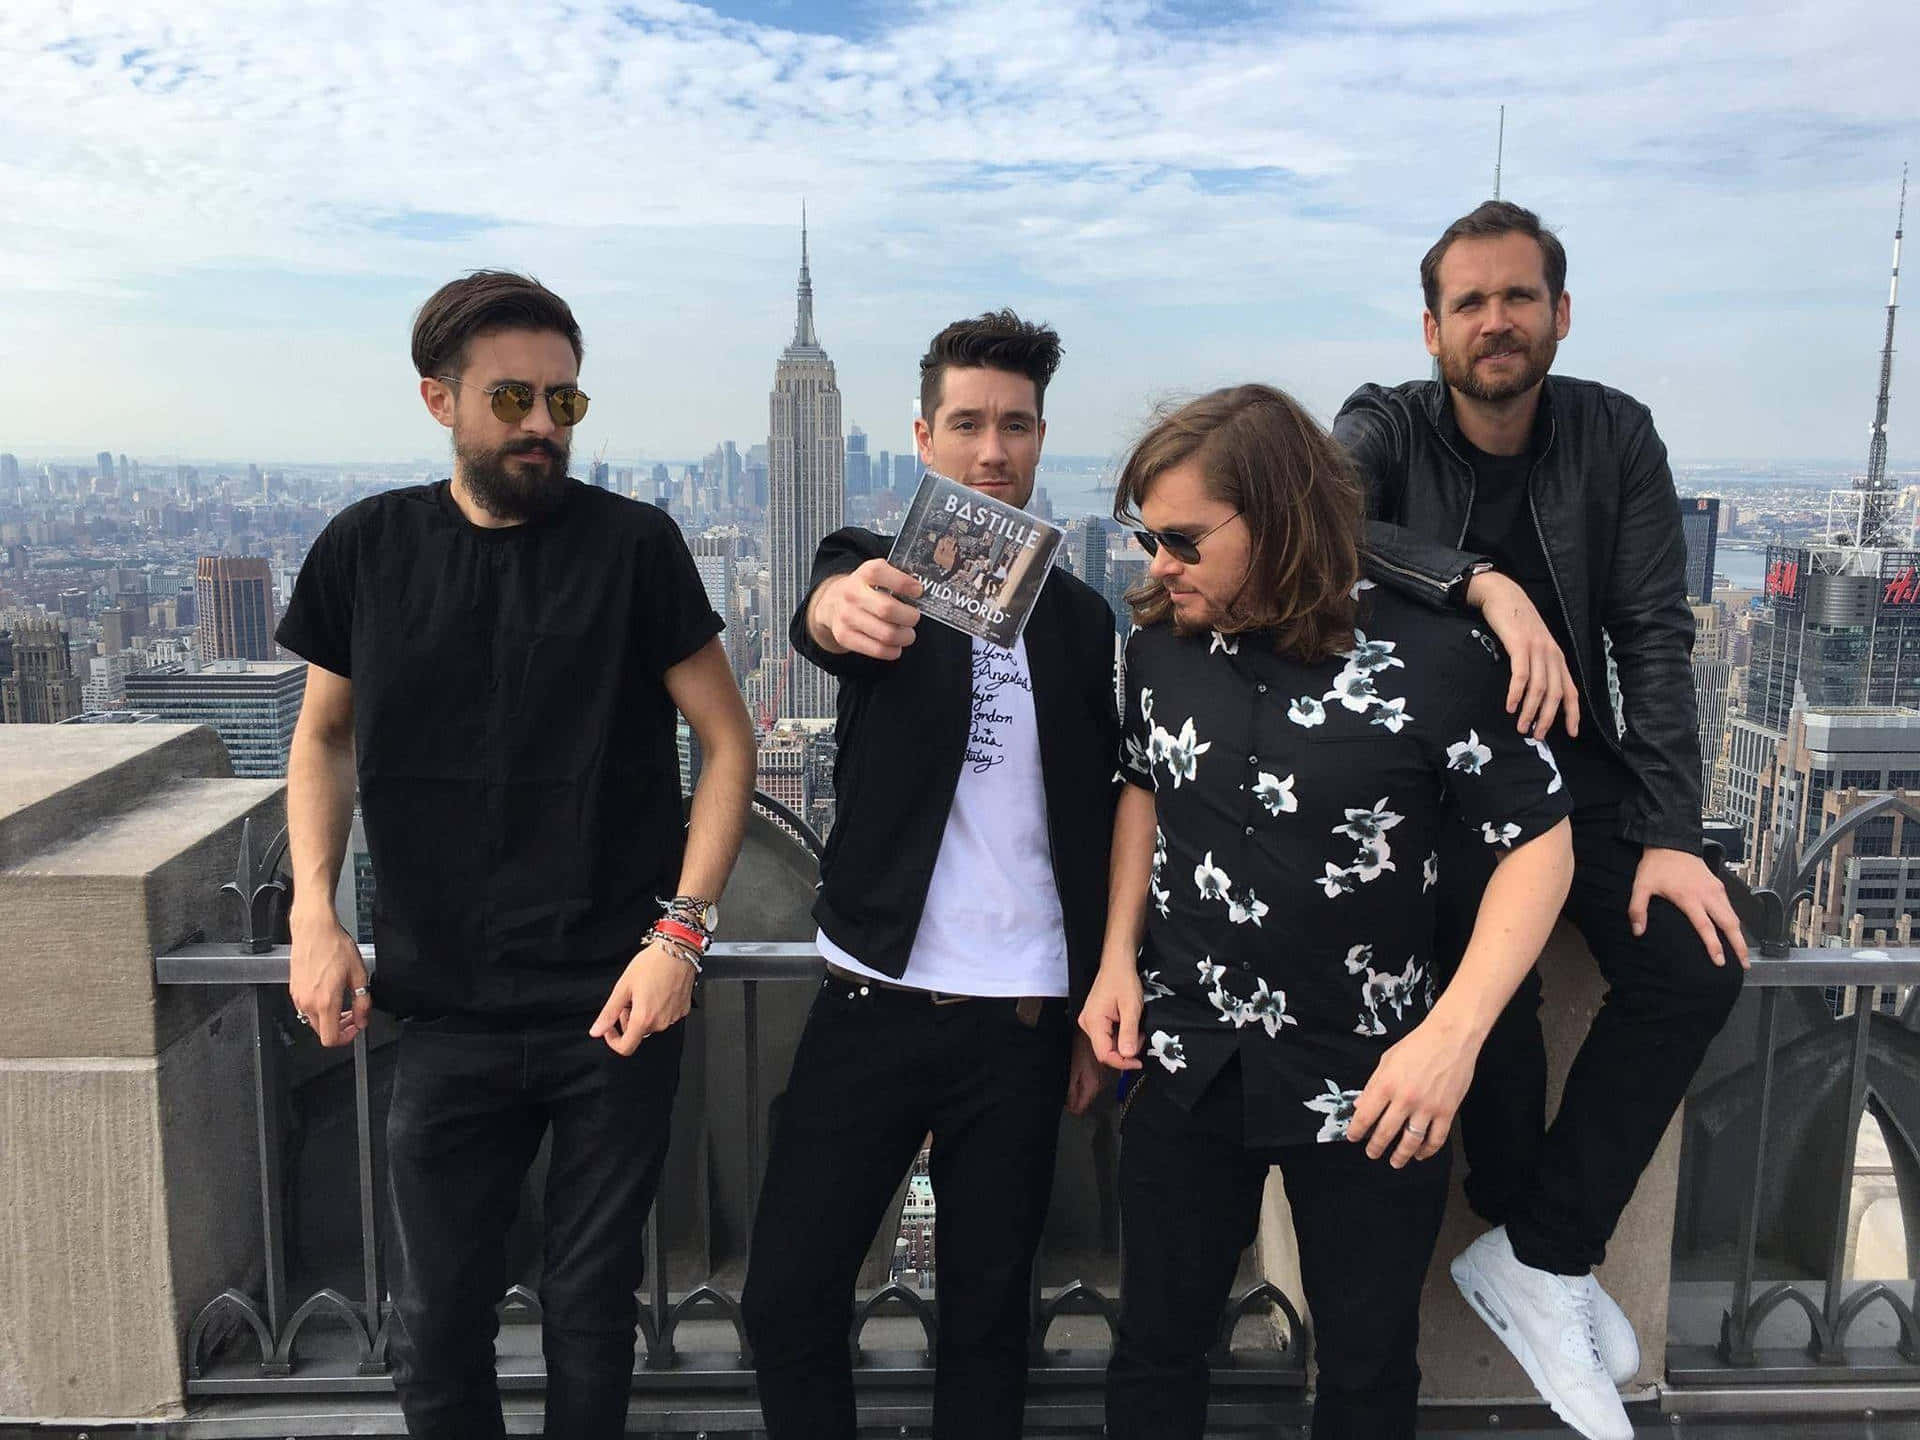 Experience the thrill of a Bastille concert